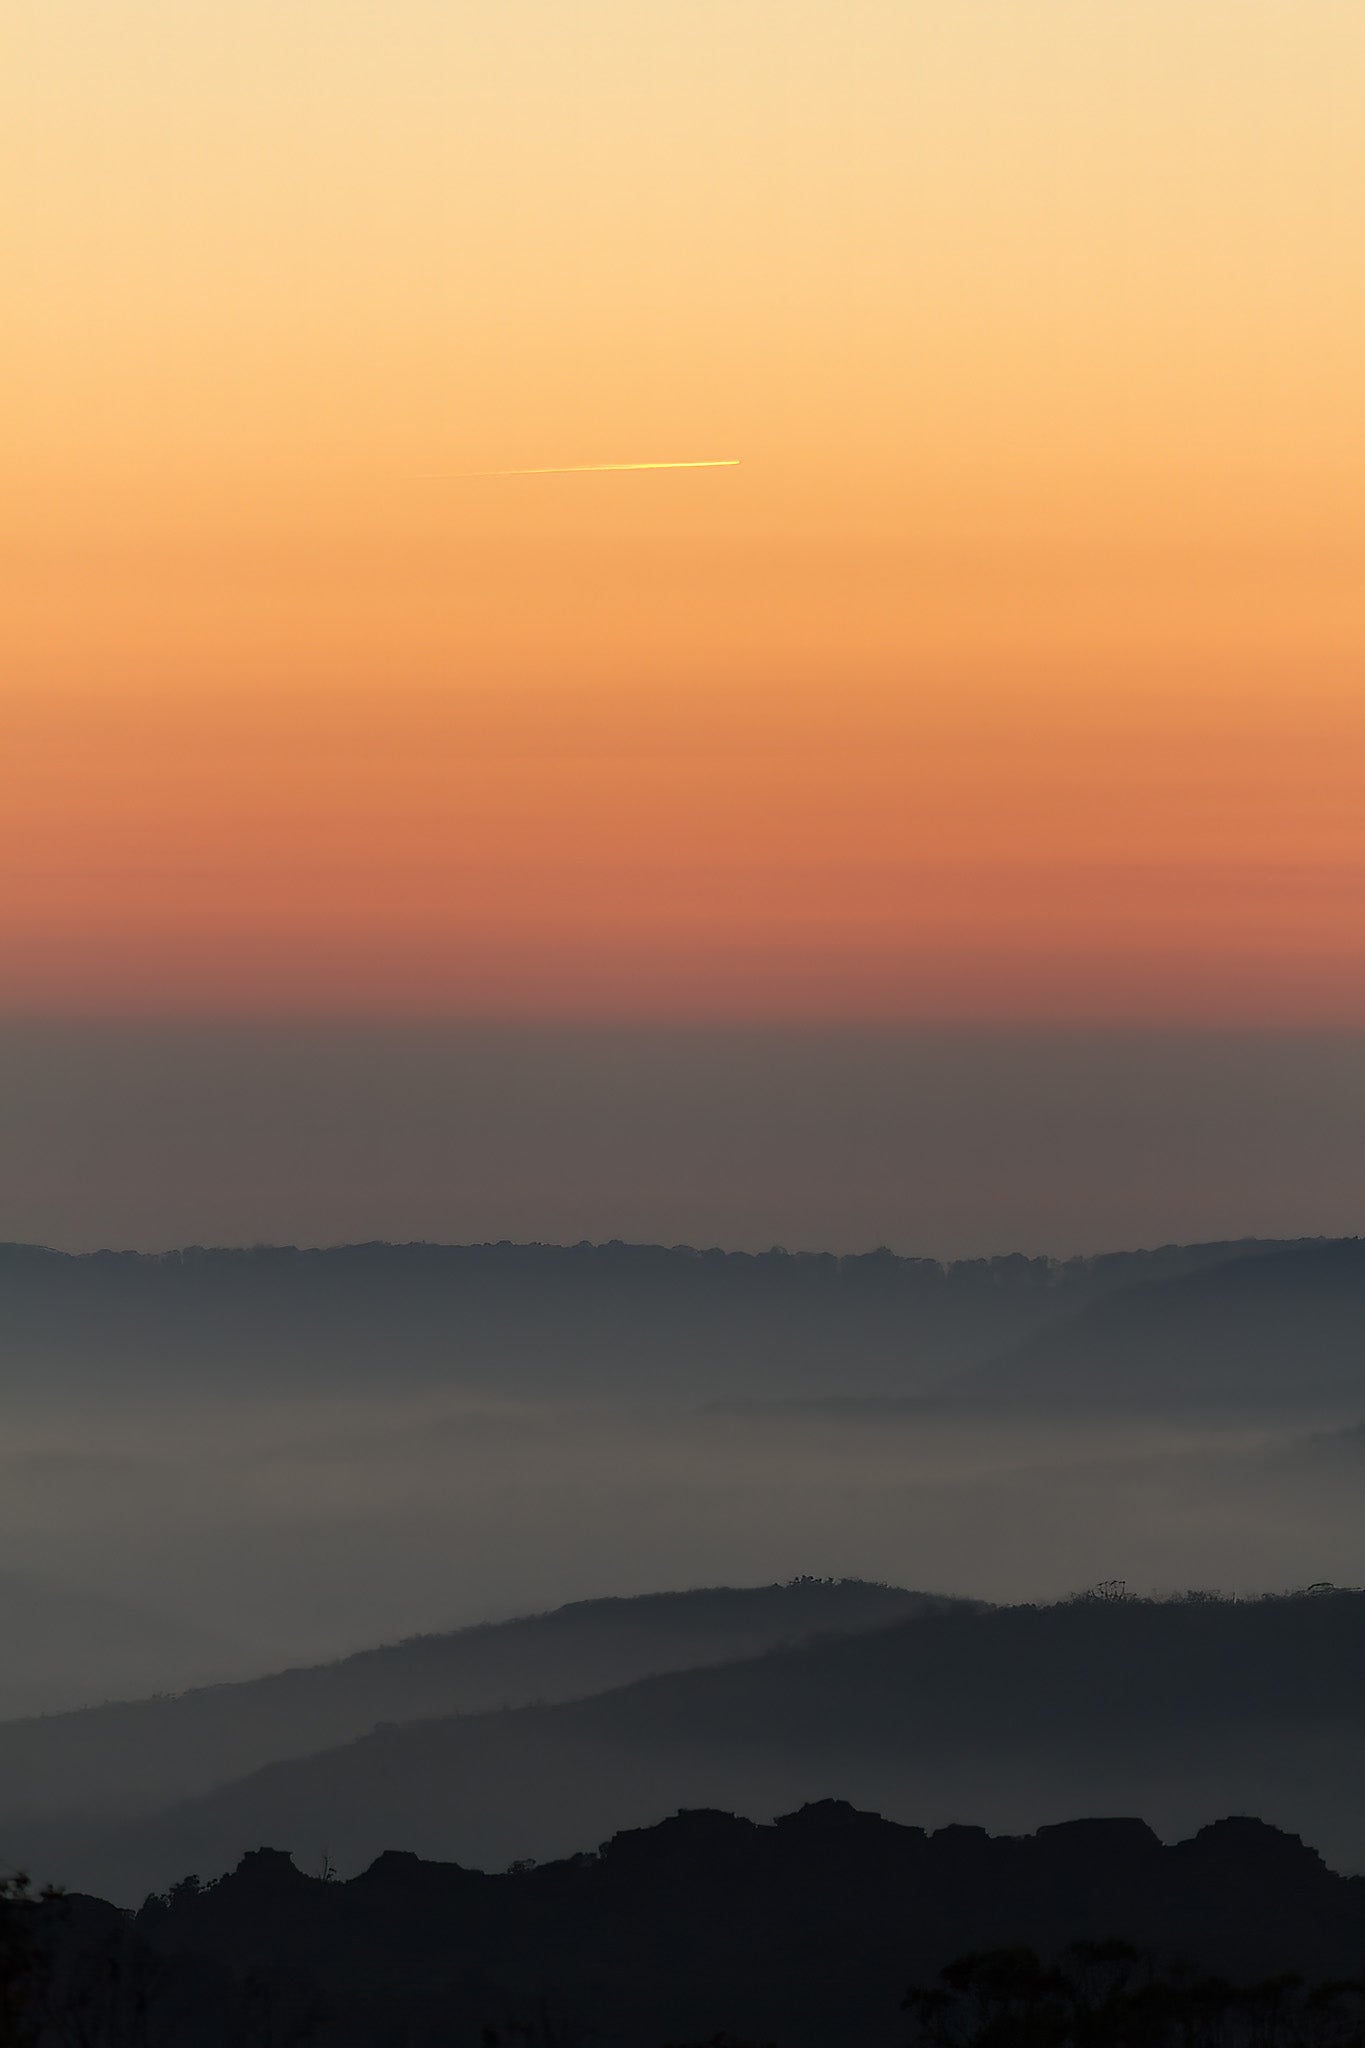 A contrail catching the dawn above receding misty hills at Mount Tomah on the Bells Line of Road in NSW, Australia.